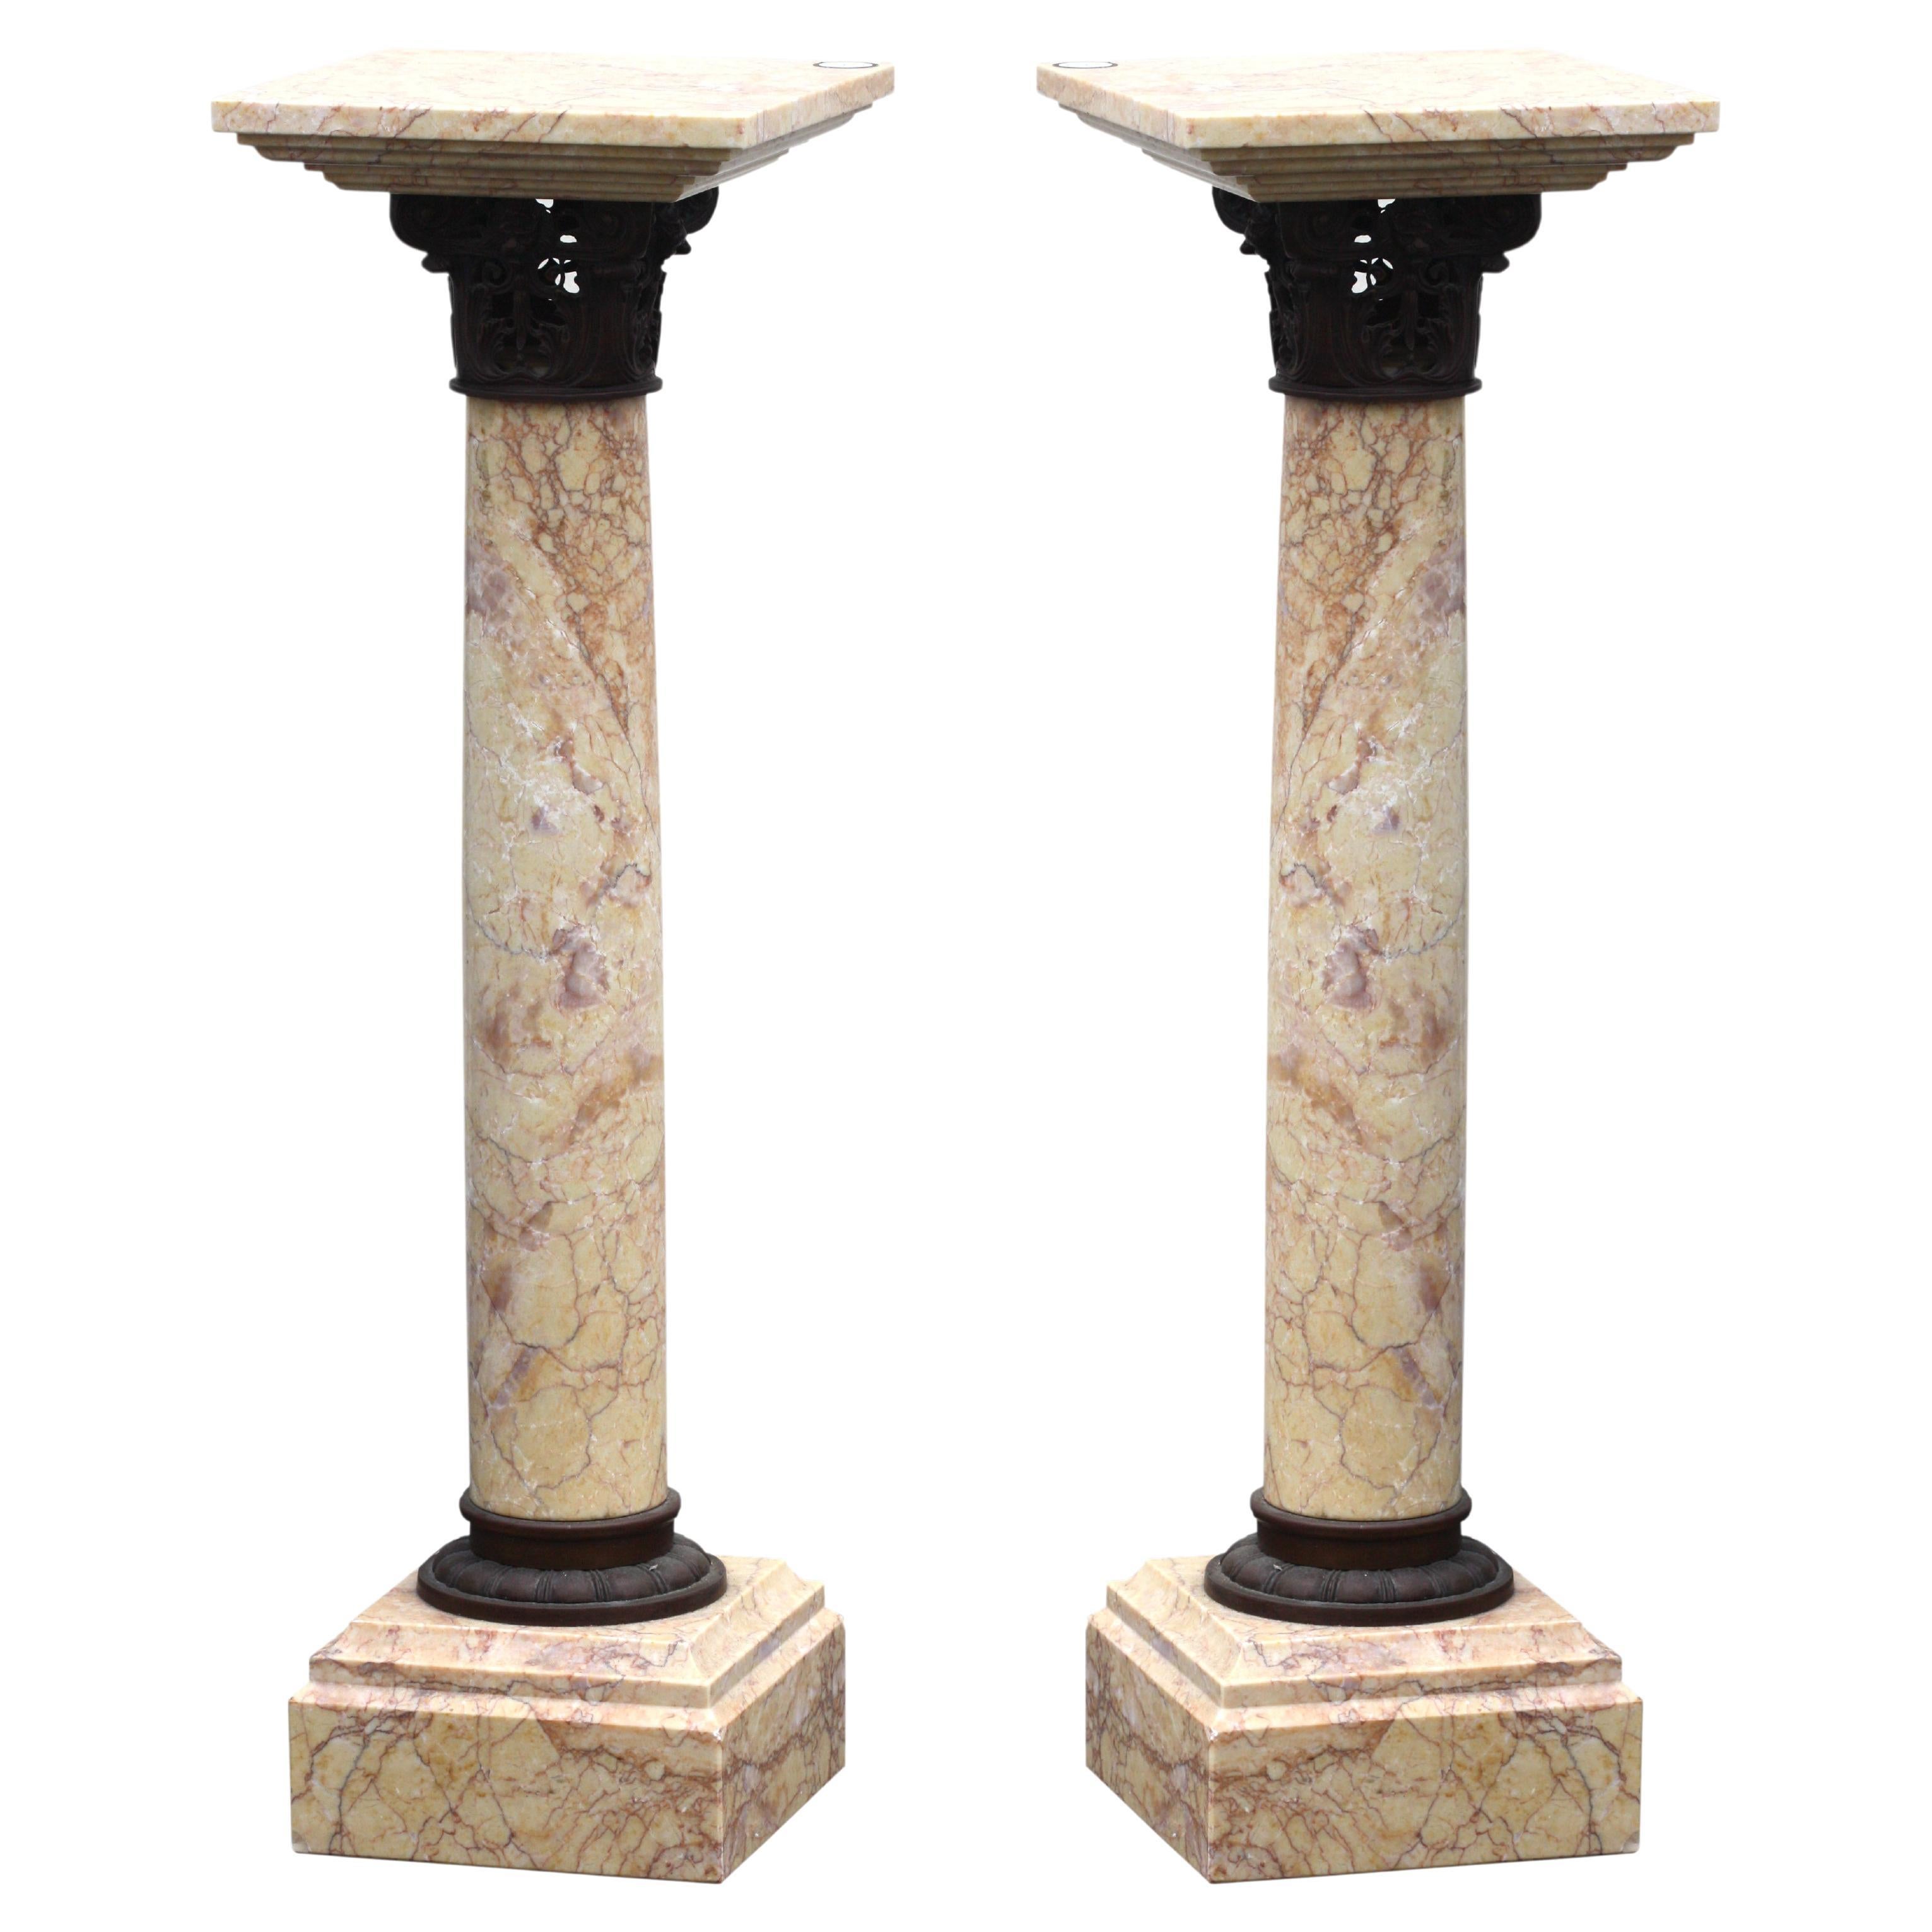 Pair Neoclassical Style Patinated-bronze-mounted Siena Marble Column Pedestals